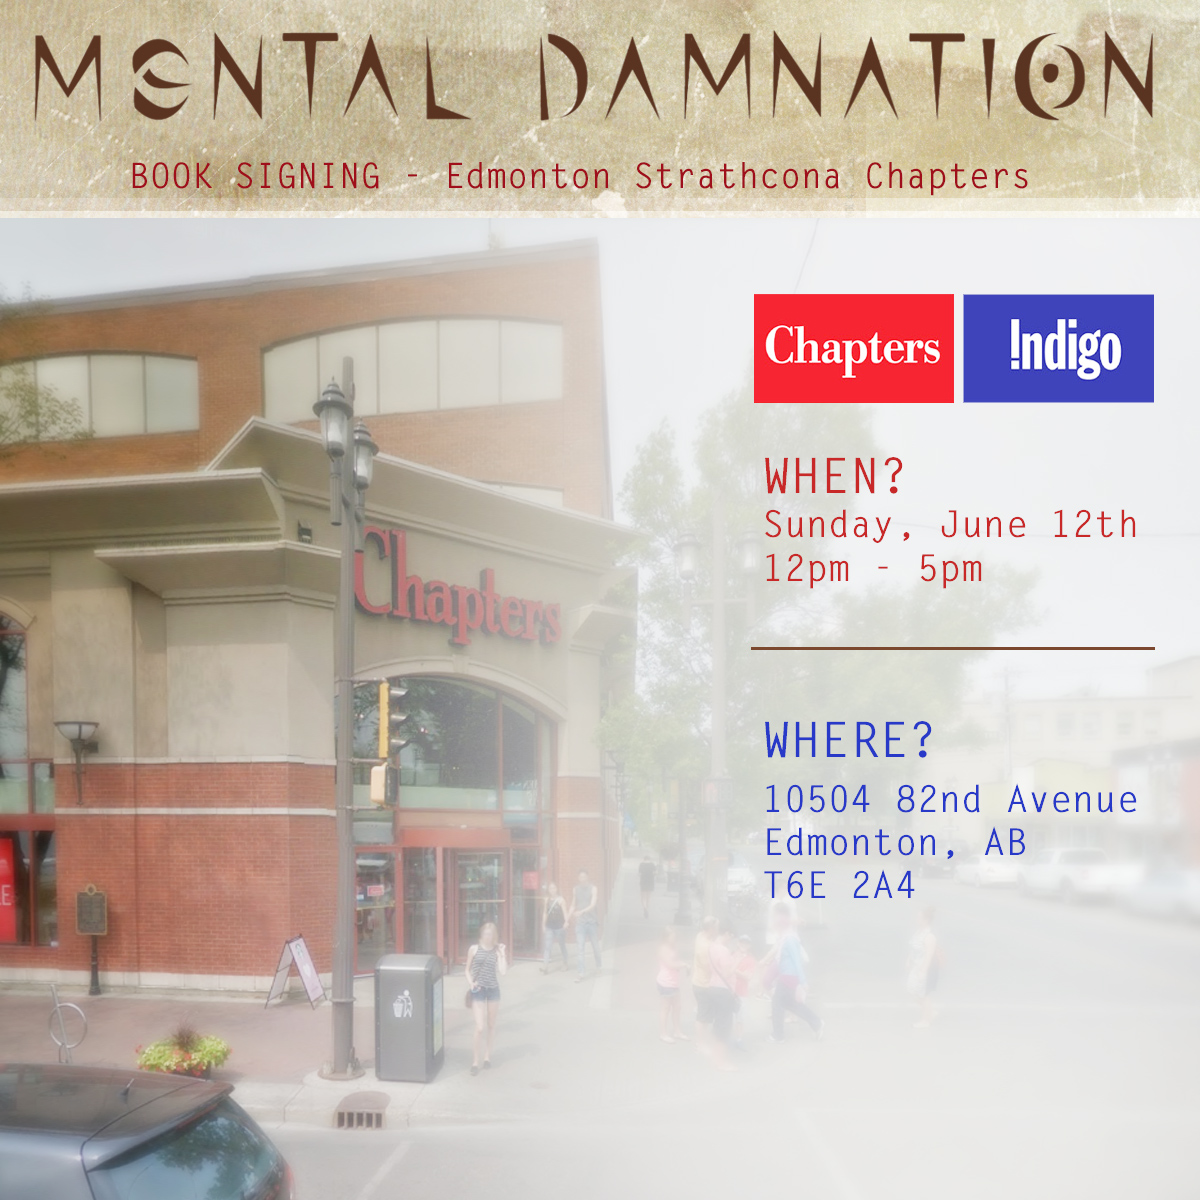 Strathcona Chapters Whyte Ave Mental Damnation Book Signing